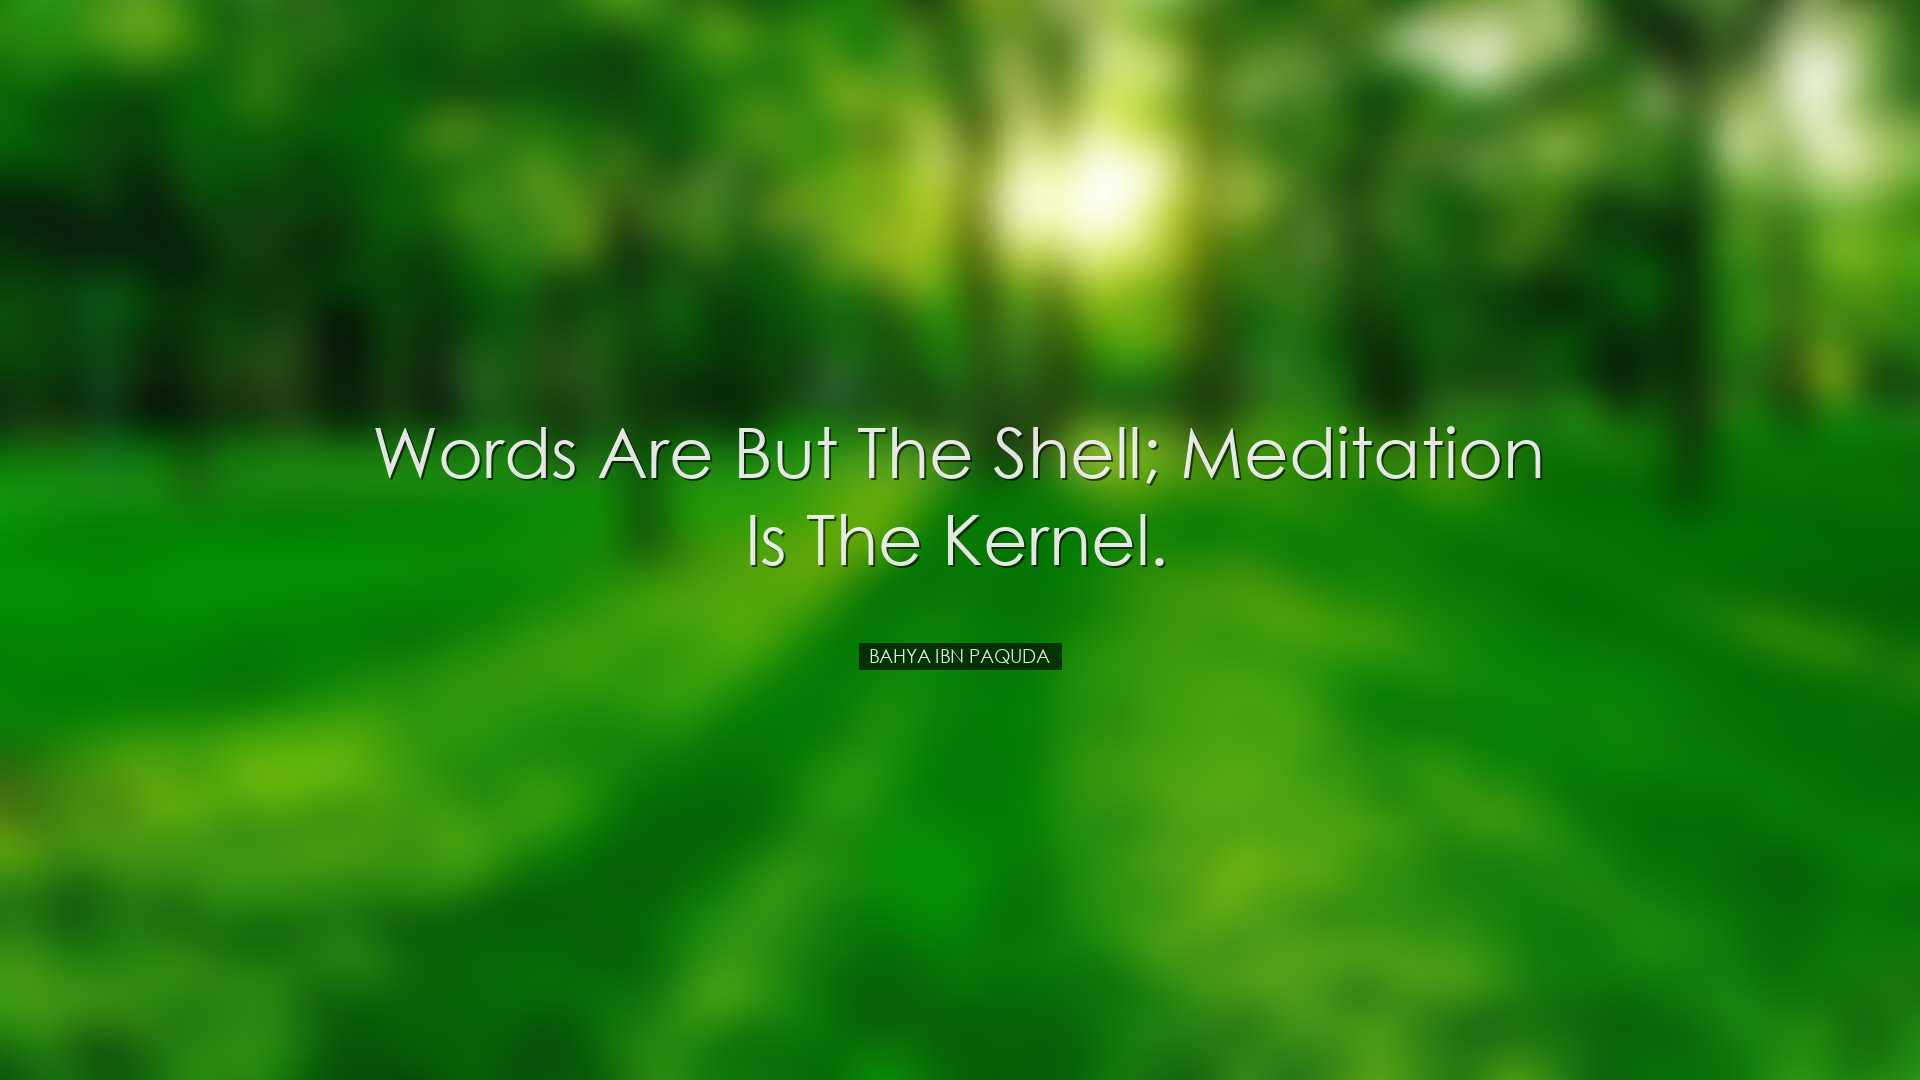 Words are but the shell; meditation is the kernel. - Bahya ibn Paq